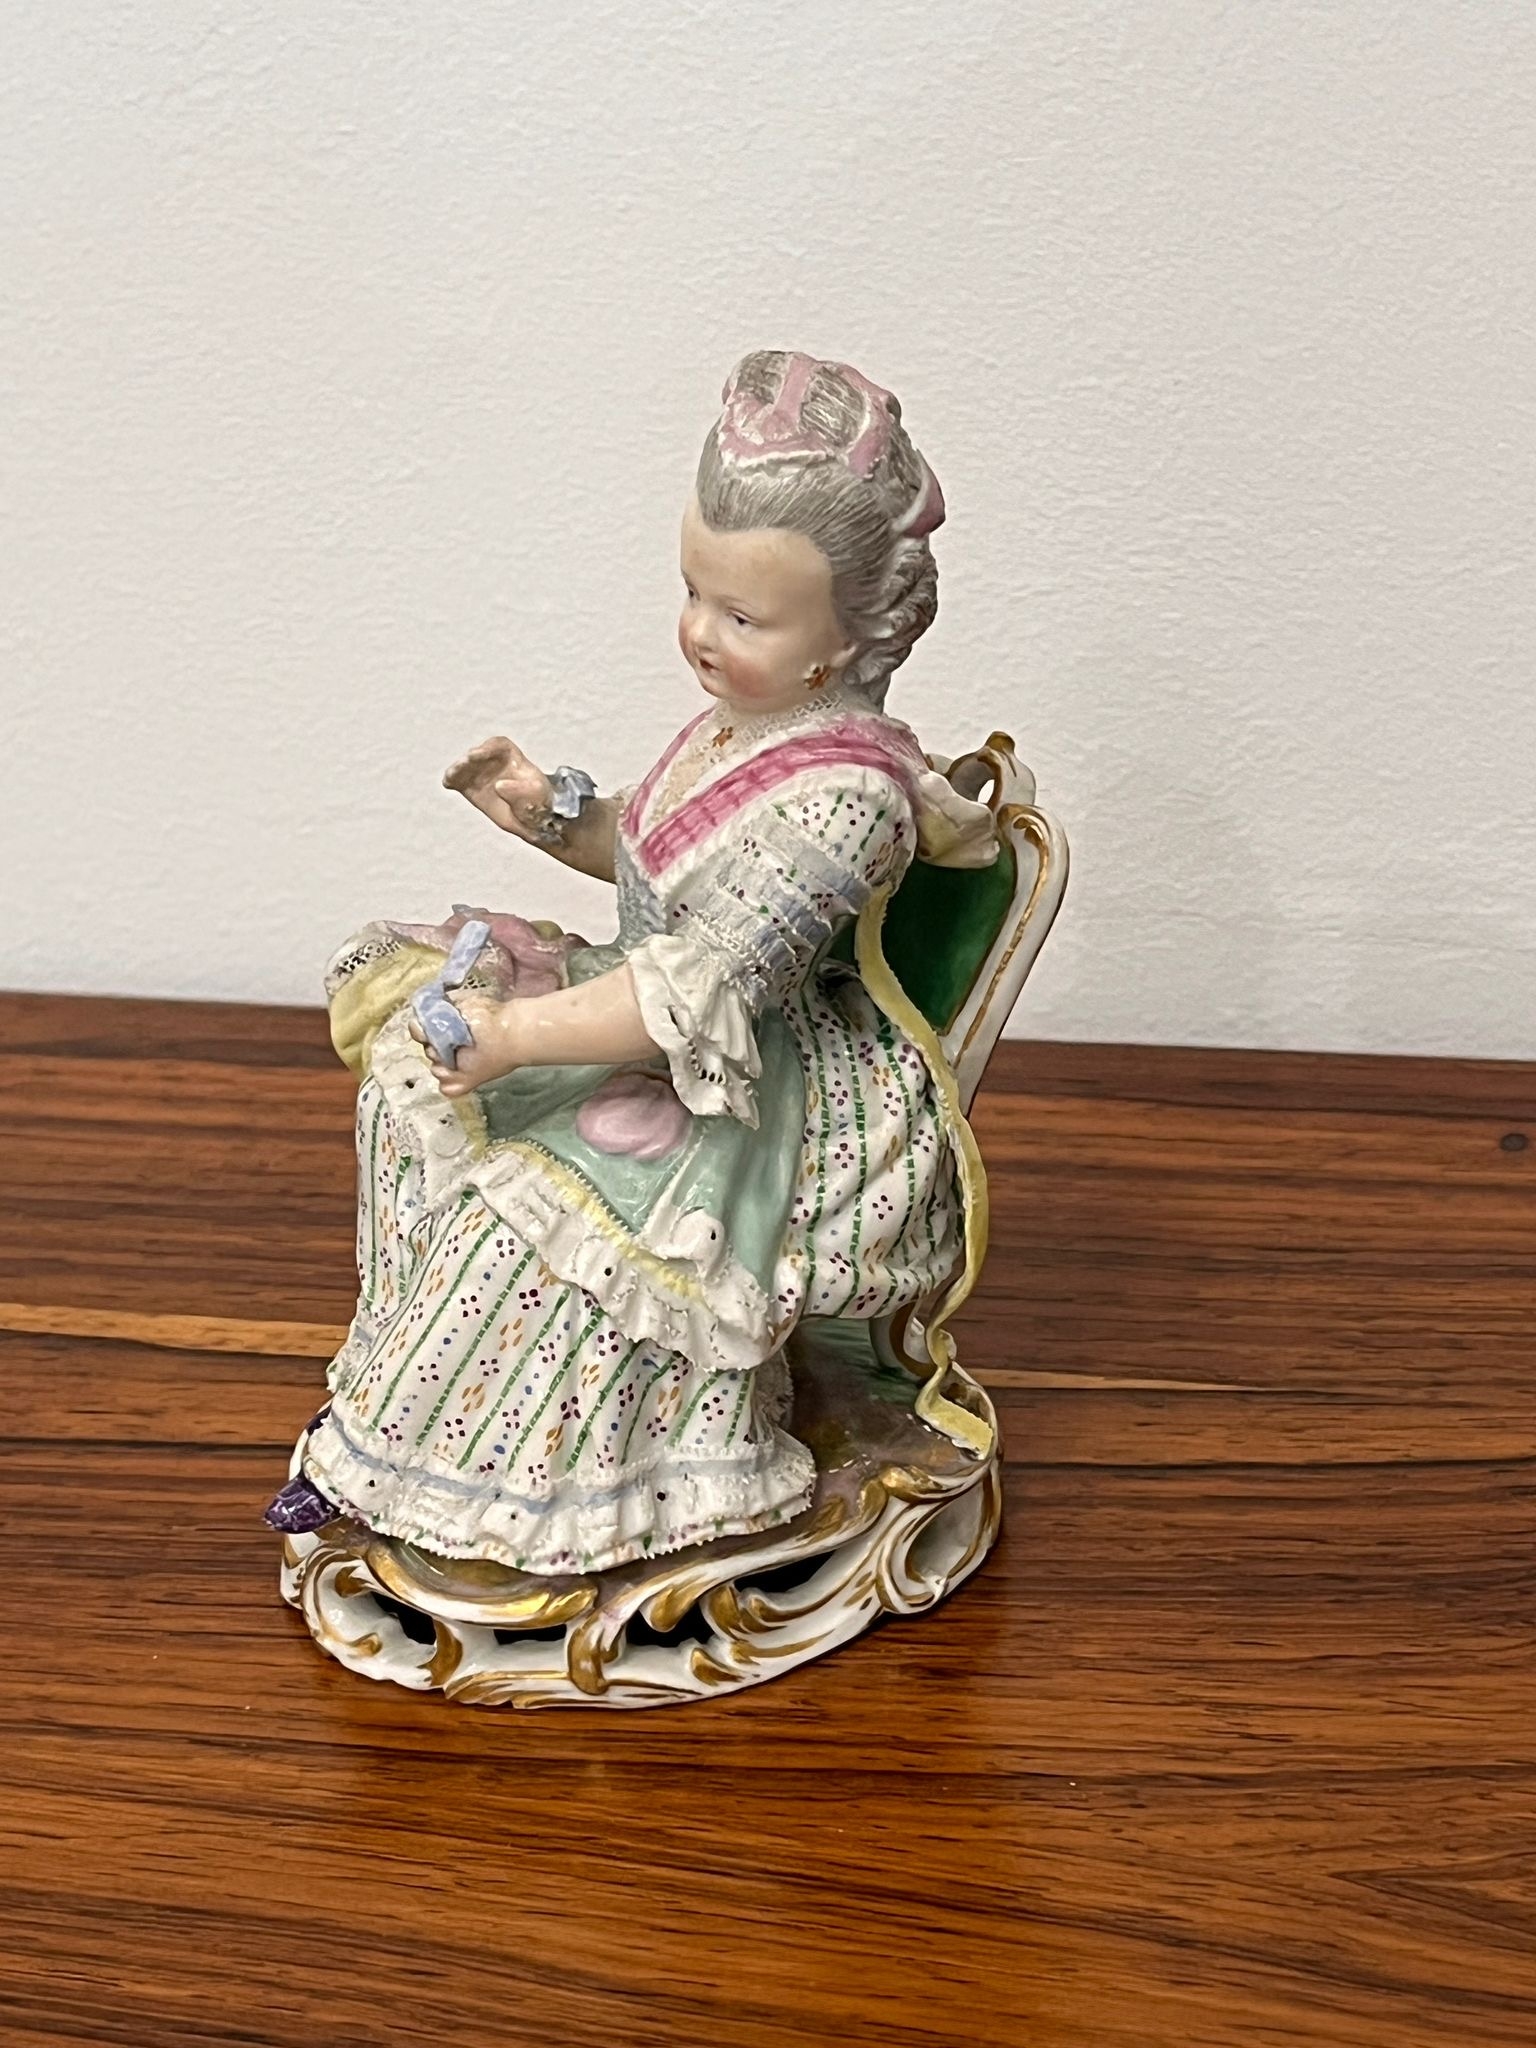 Antique Meissen figure of a lady sitting on a chair 19th century height approx 13cm - Image 2 of 4